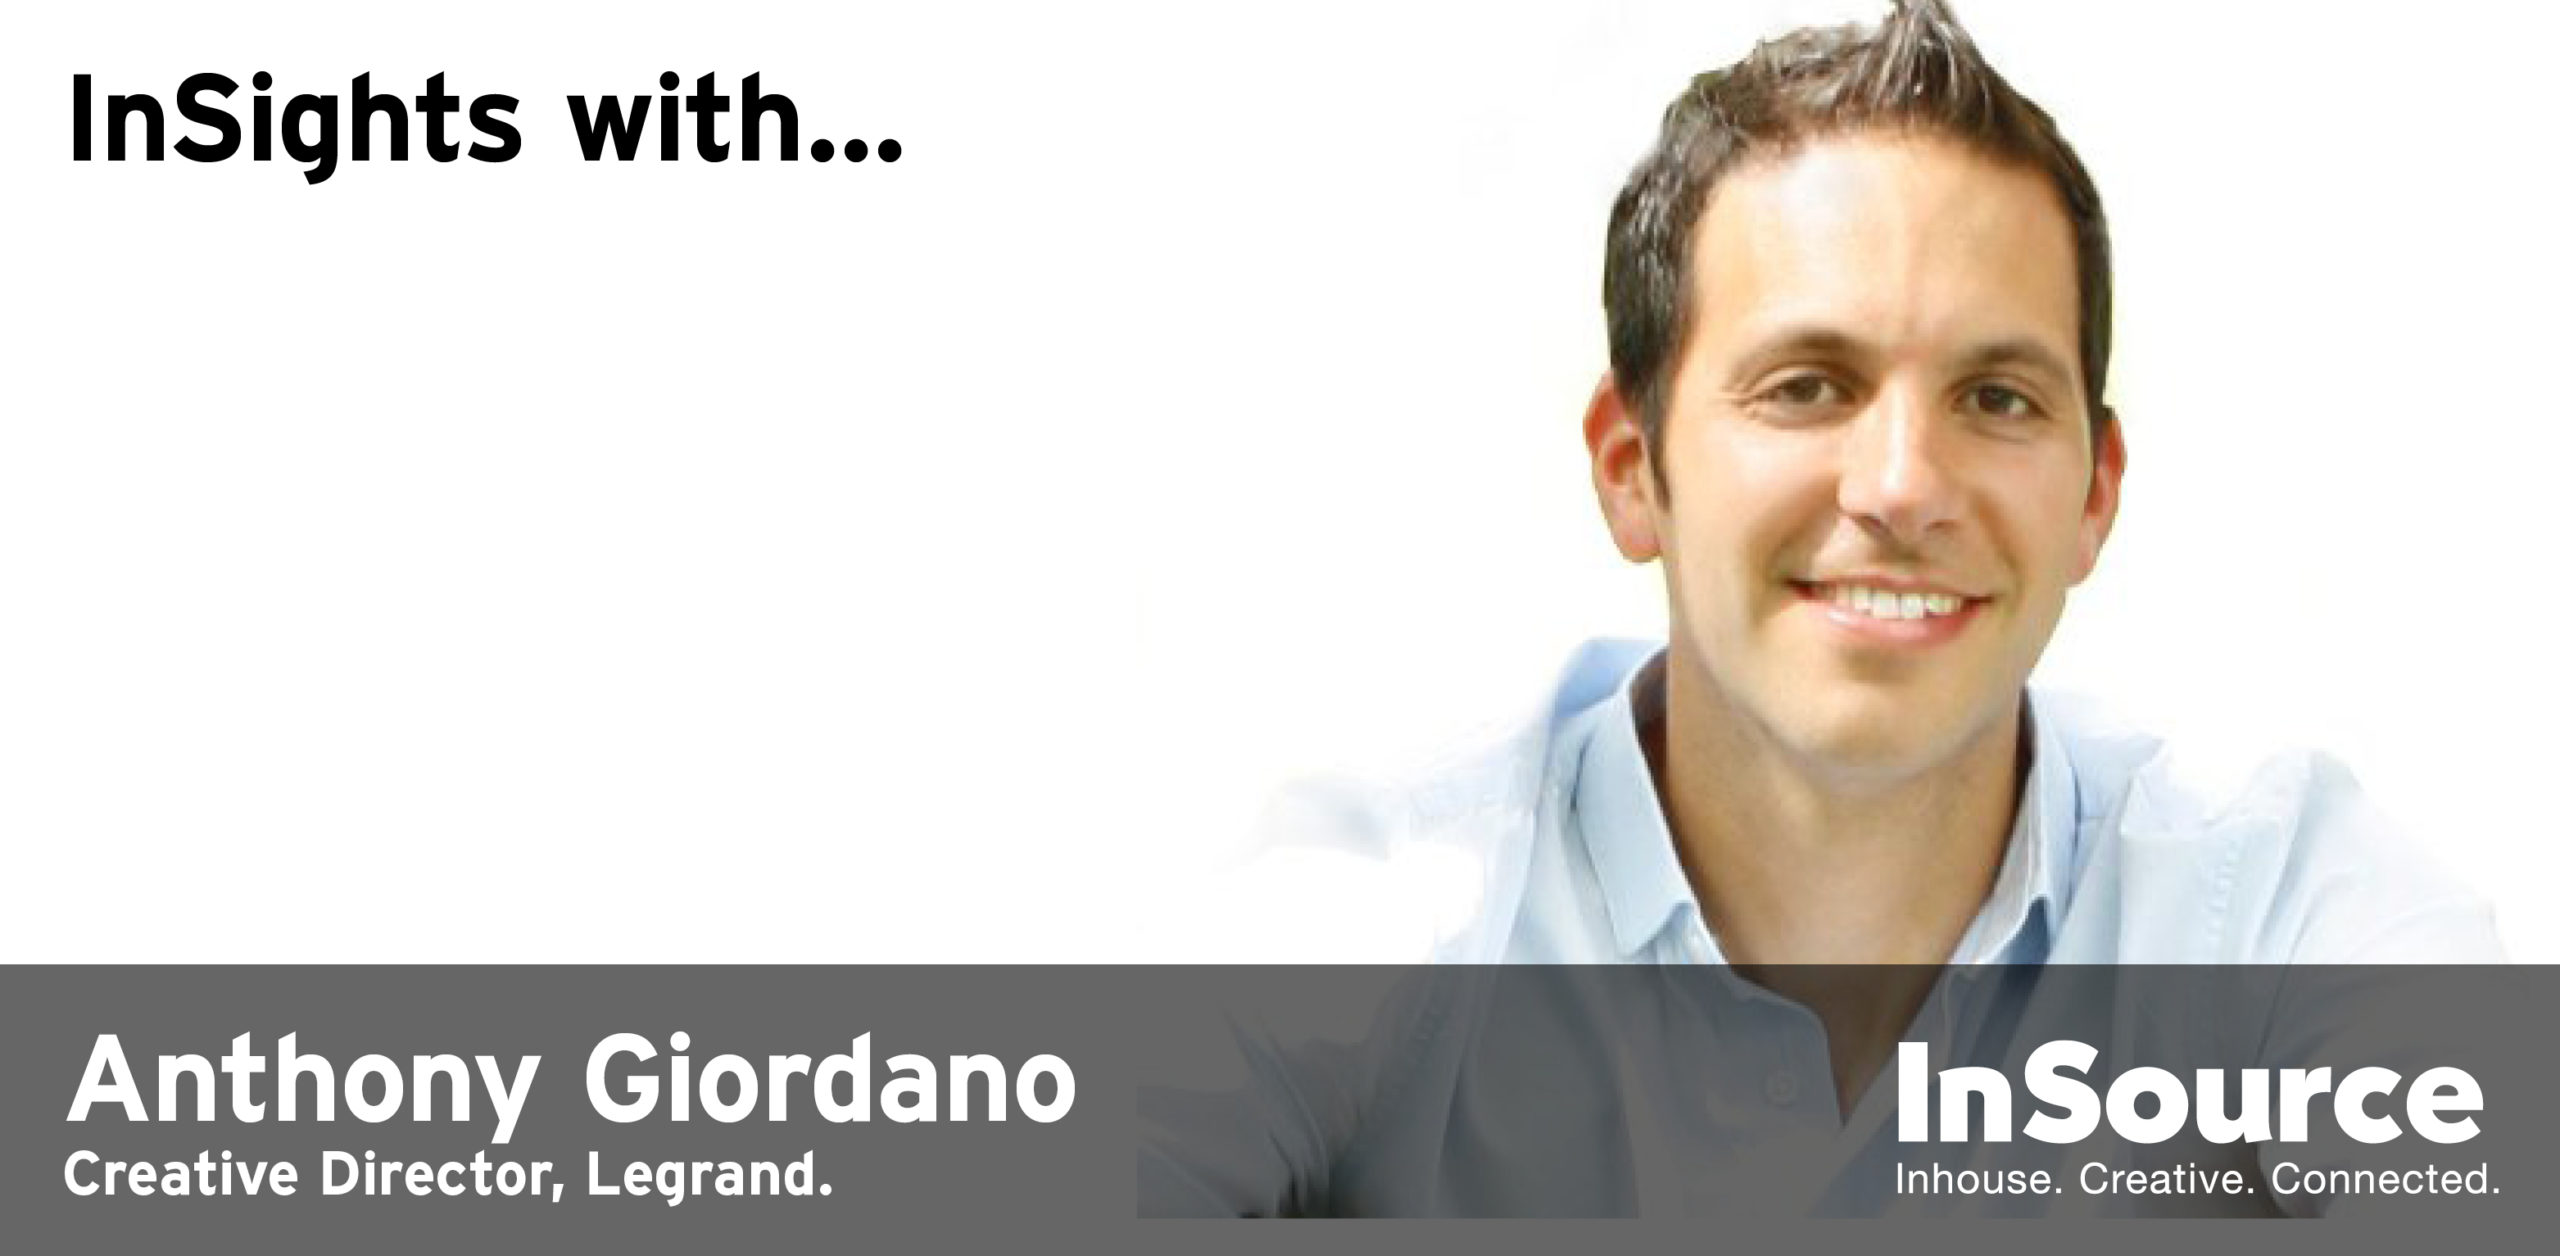 InSights with…Anthony Giordano